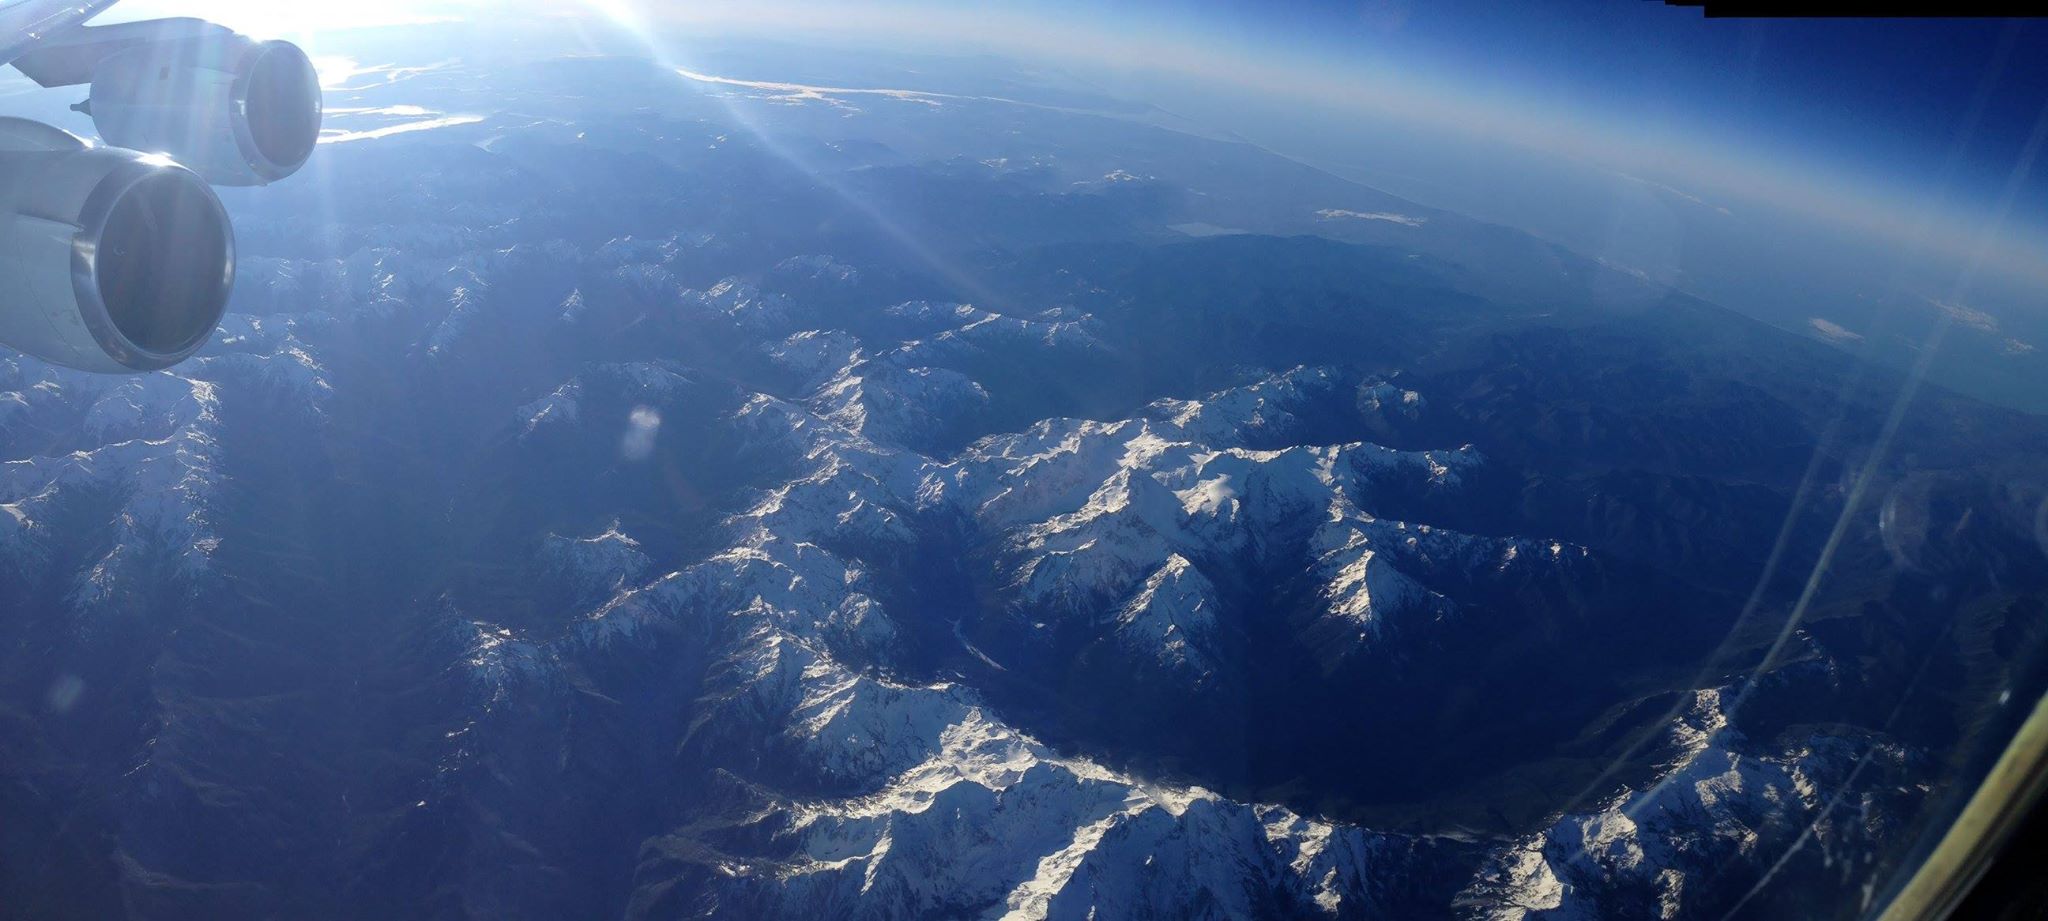 Image taken from aircraft during OLYMPEX